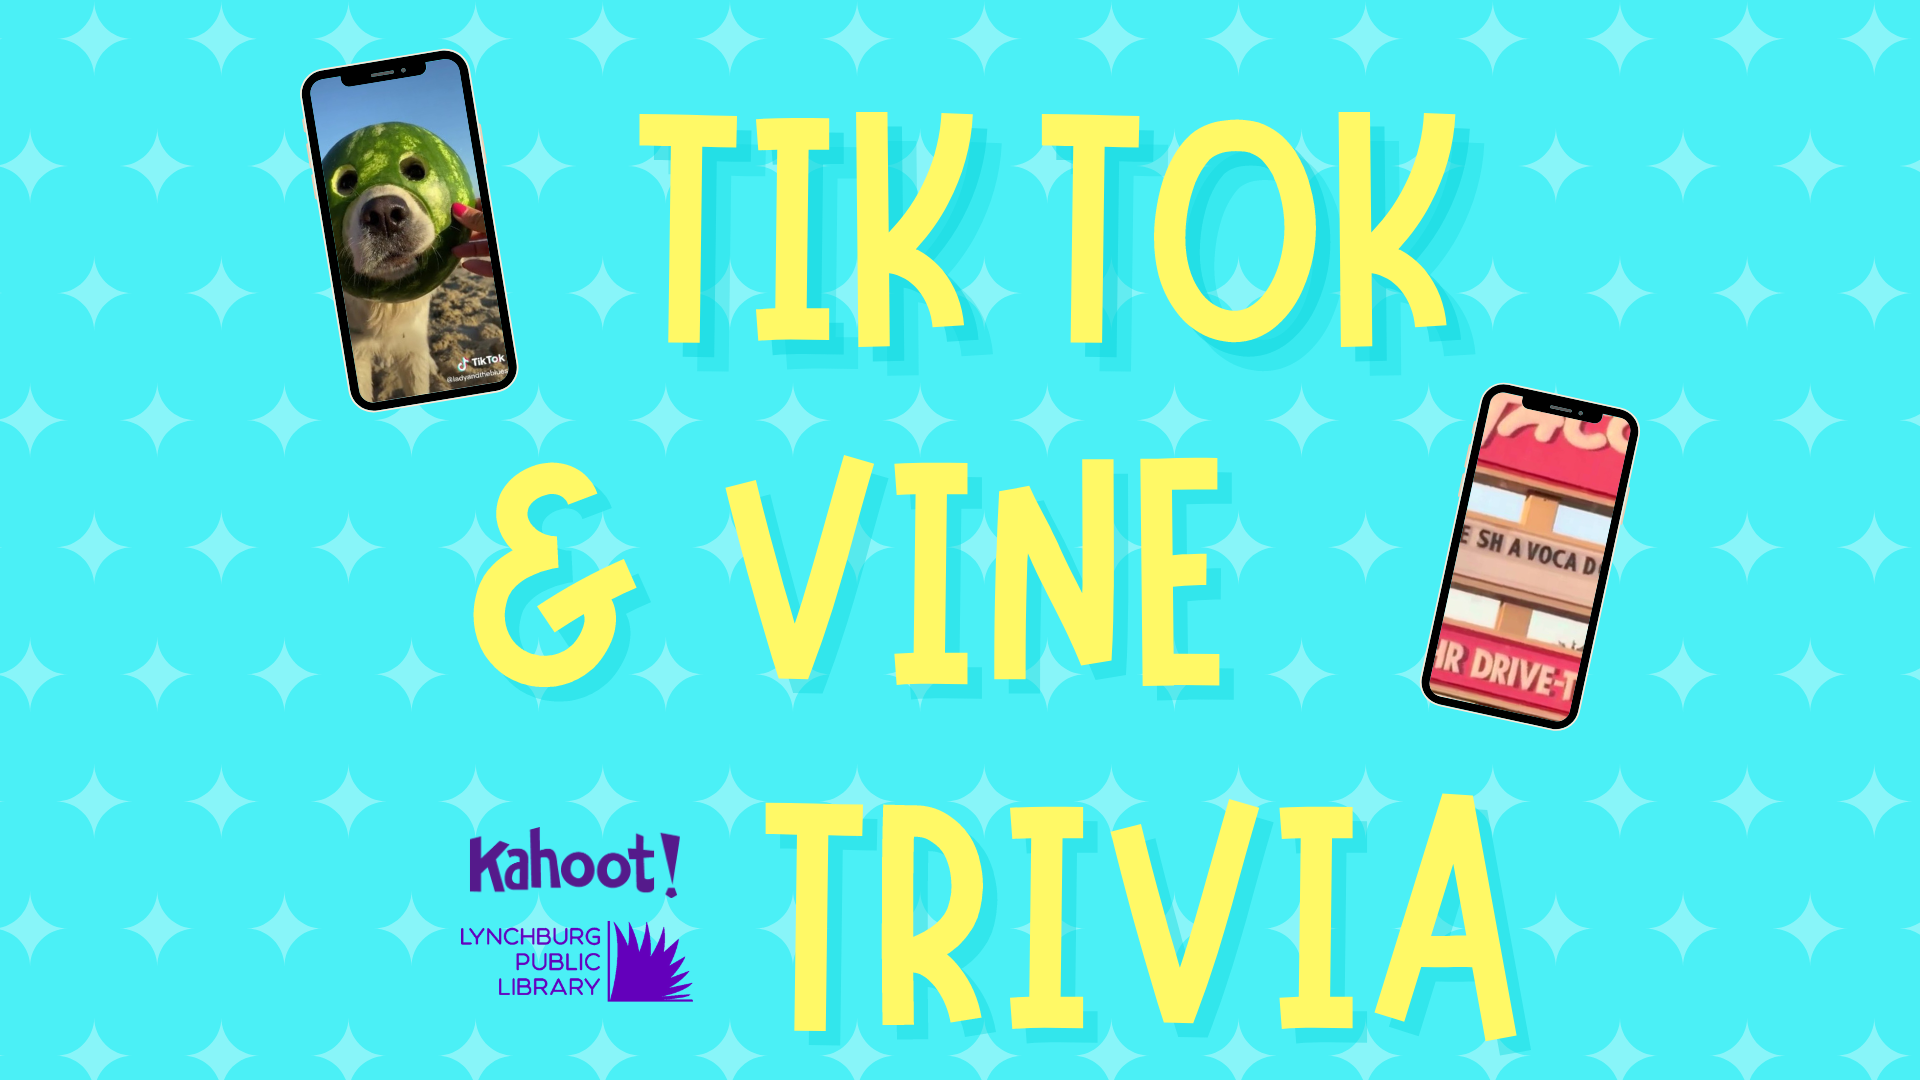 An image featuring two smartphones showing images of popular Tik Toks and Vines. The text states Tik Tok & Vine Trivia 